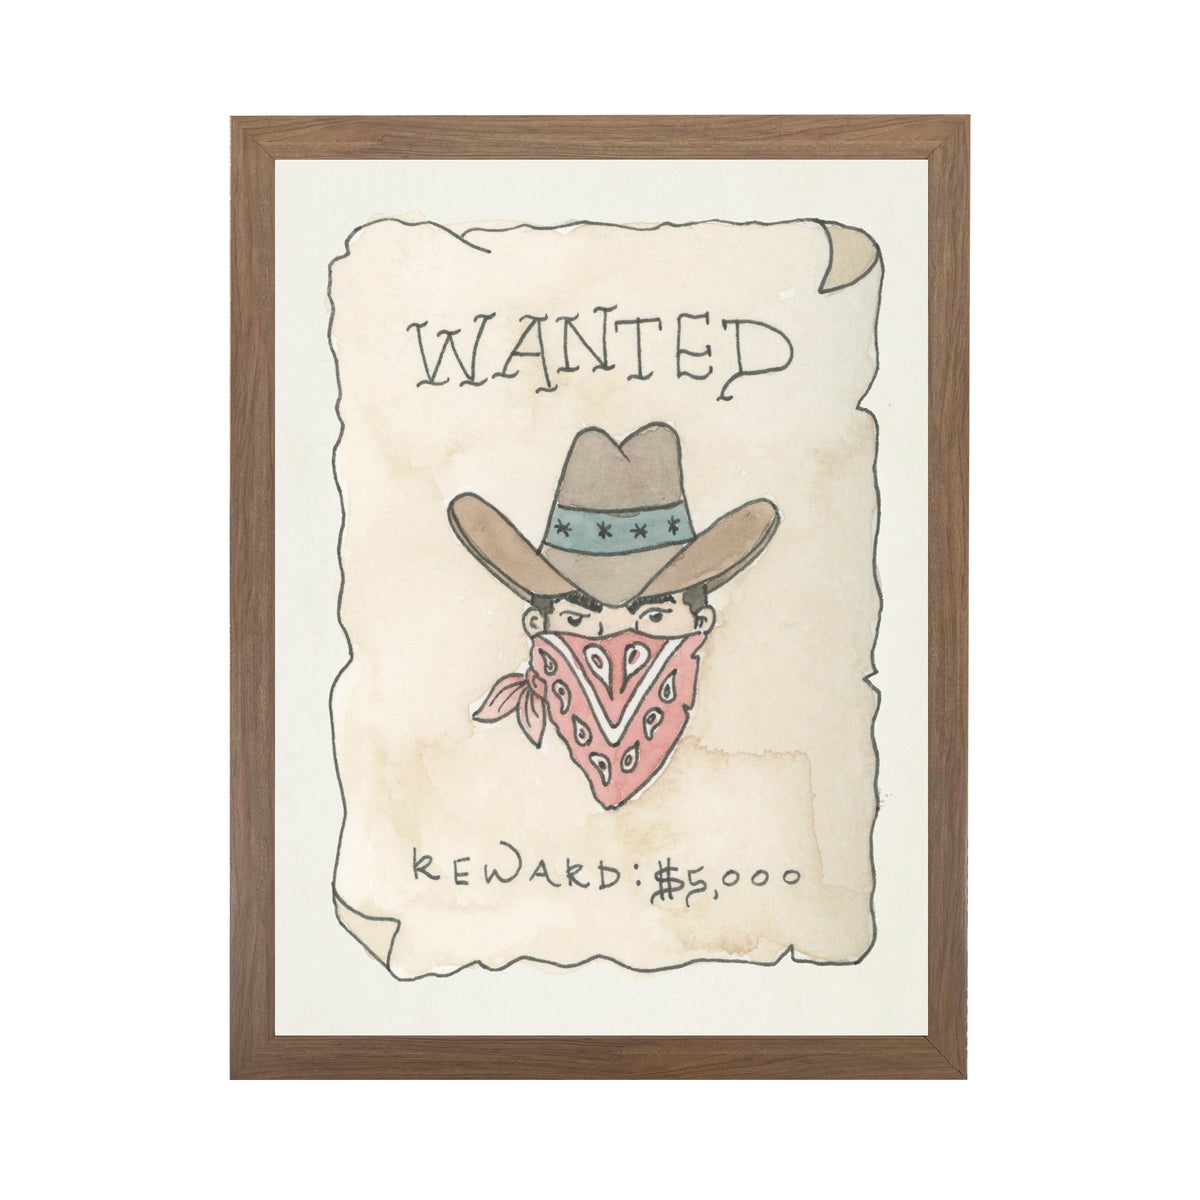 Framed Watercolor "Wanted" Boy Poster Wall Art